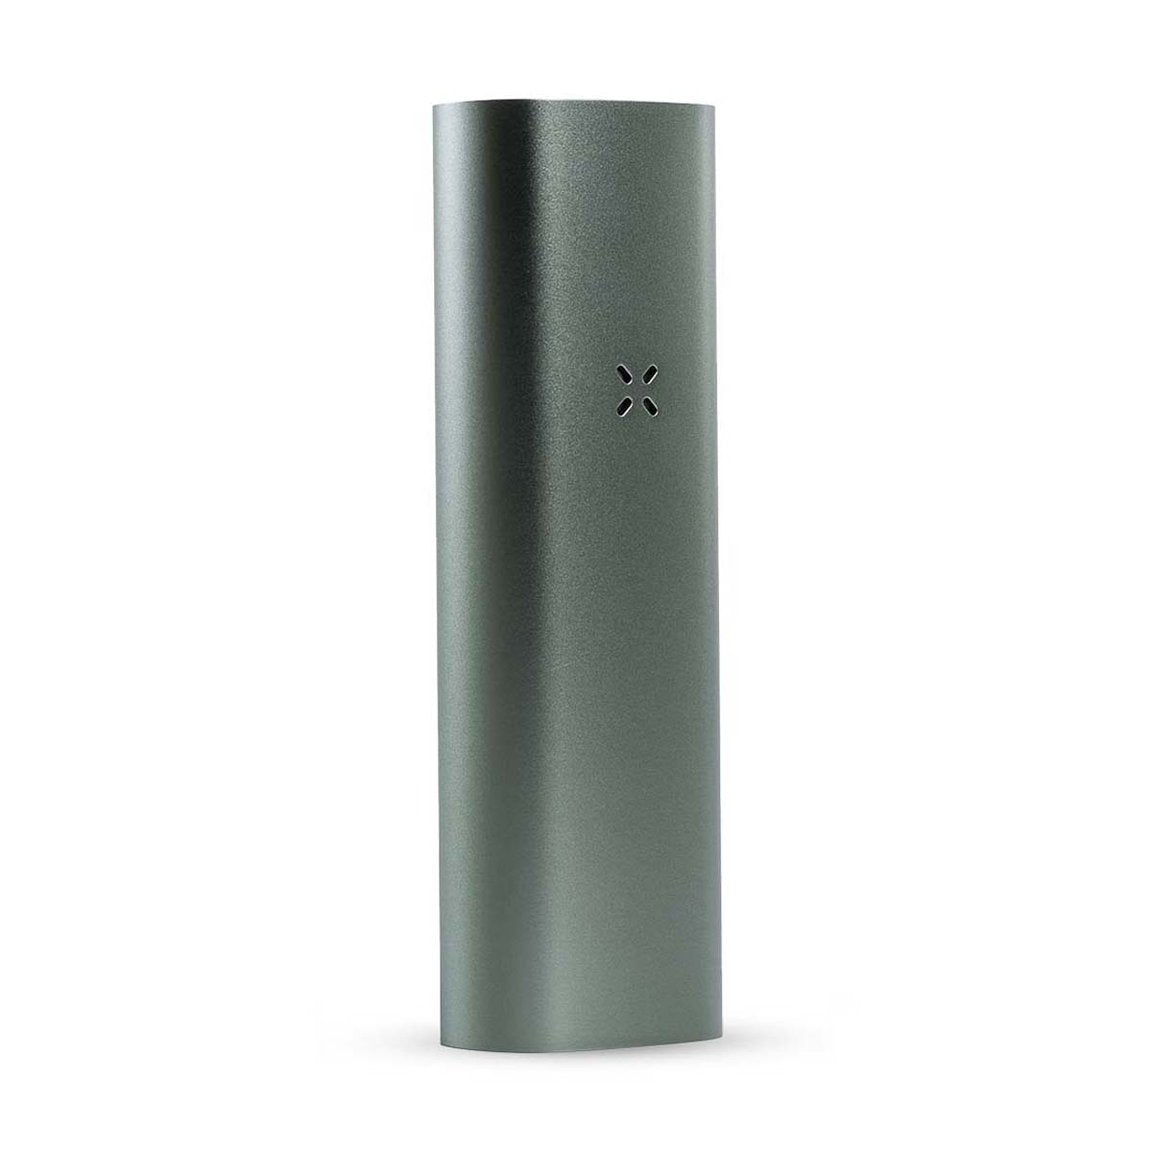 PAX 3 Vaporizer Complete Kit 🌿 by PAX | Mission Dispensary